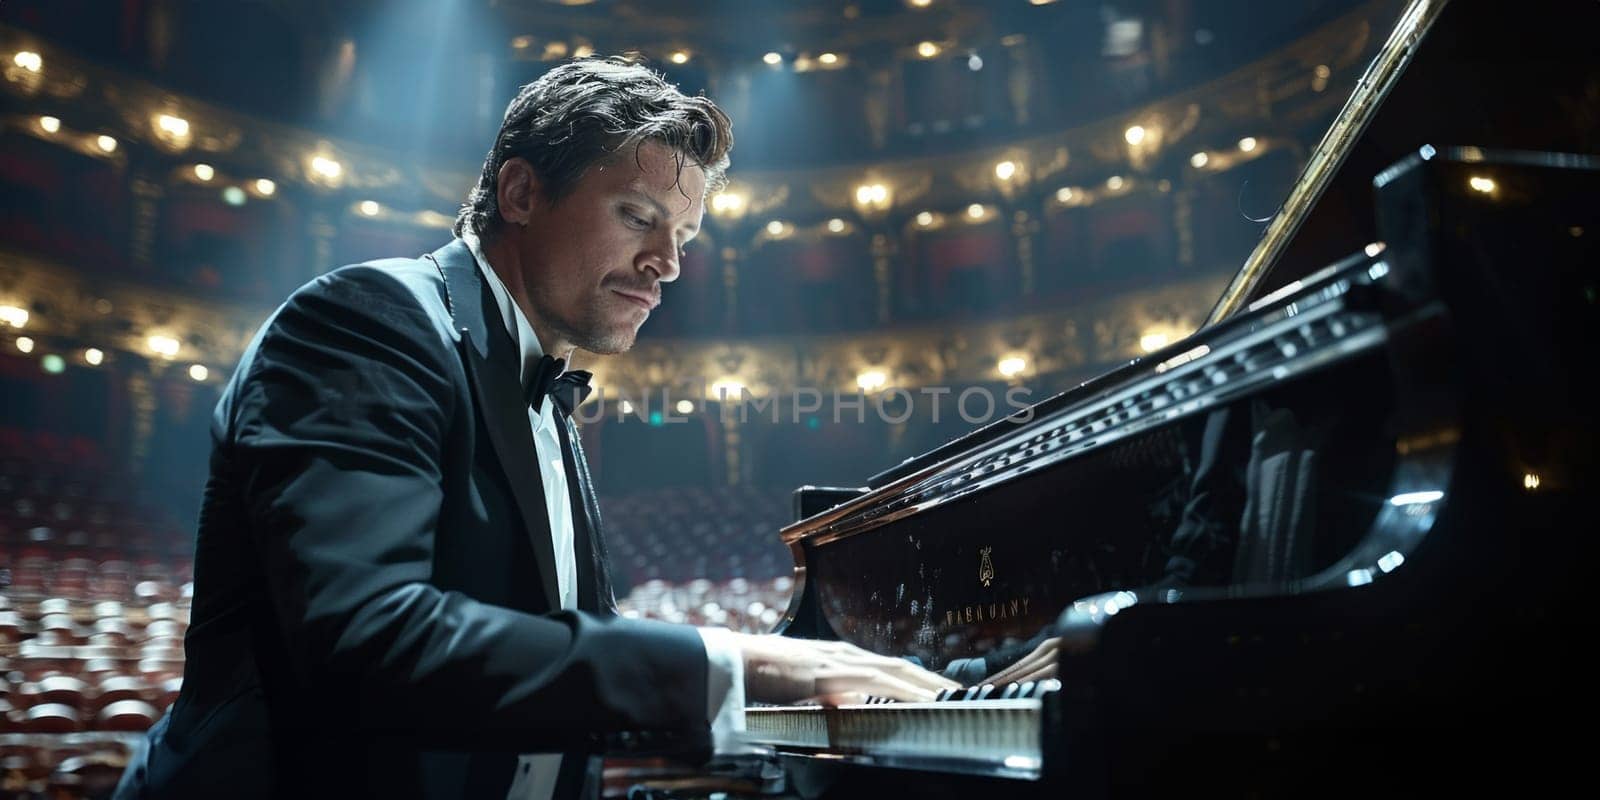 A talented man in a classic suit passionately playing a grand piano with precision and flair by but_photo